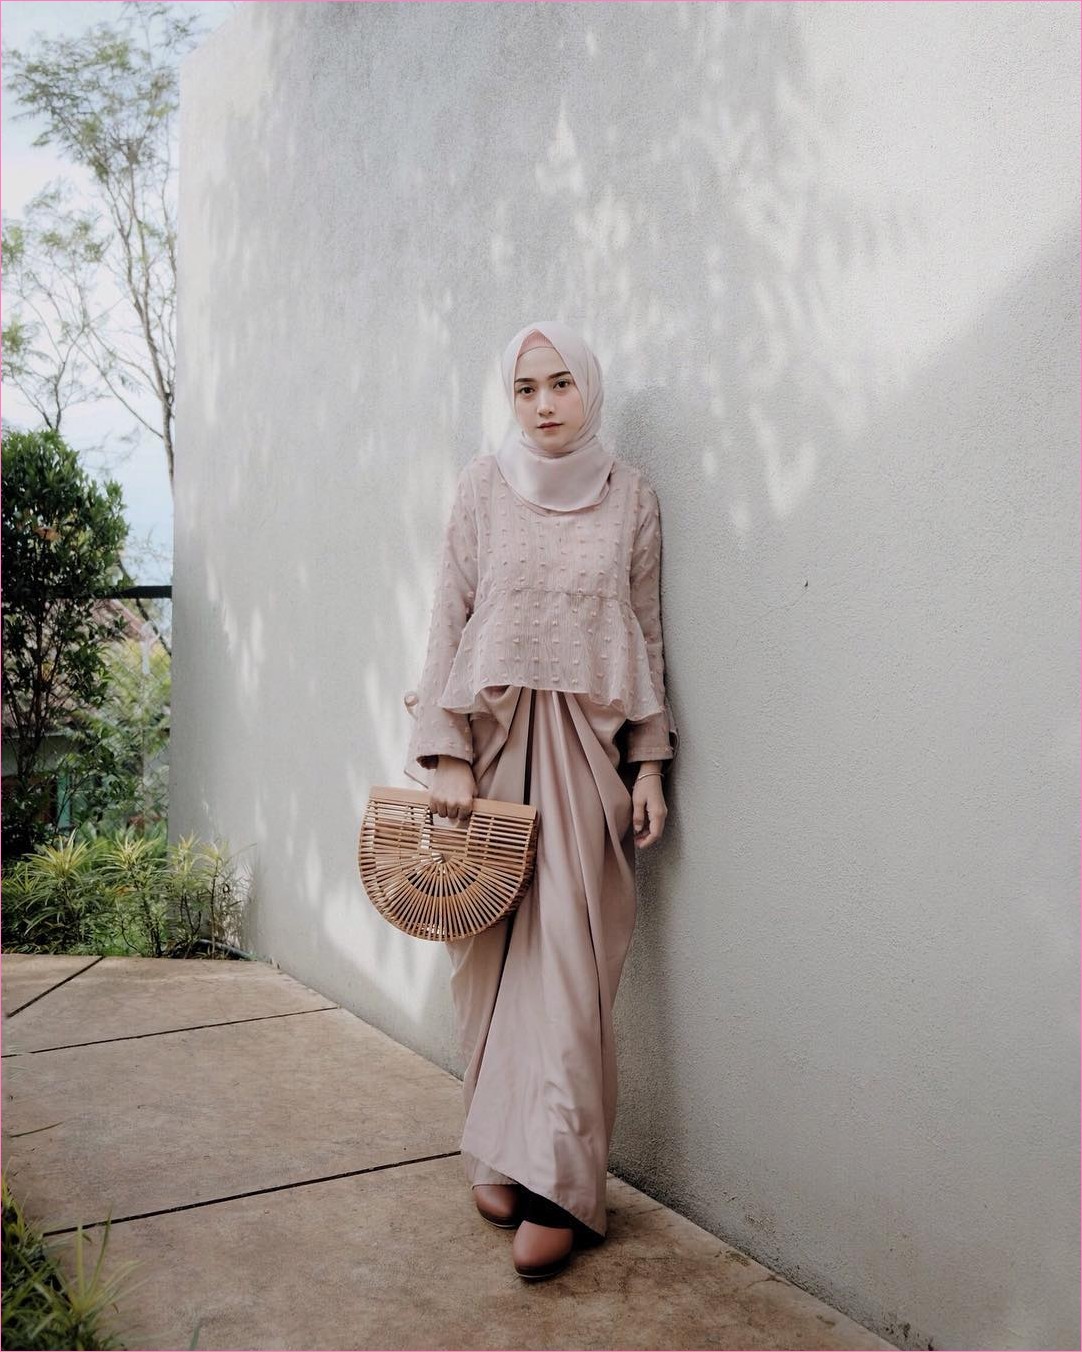  OOTD kondangan Hijab outfit in 2019 Ootd Hijab outfit t